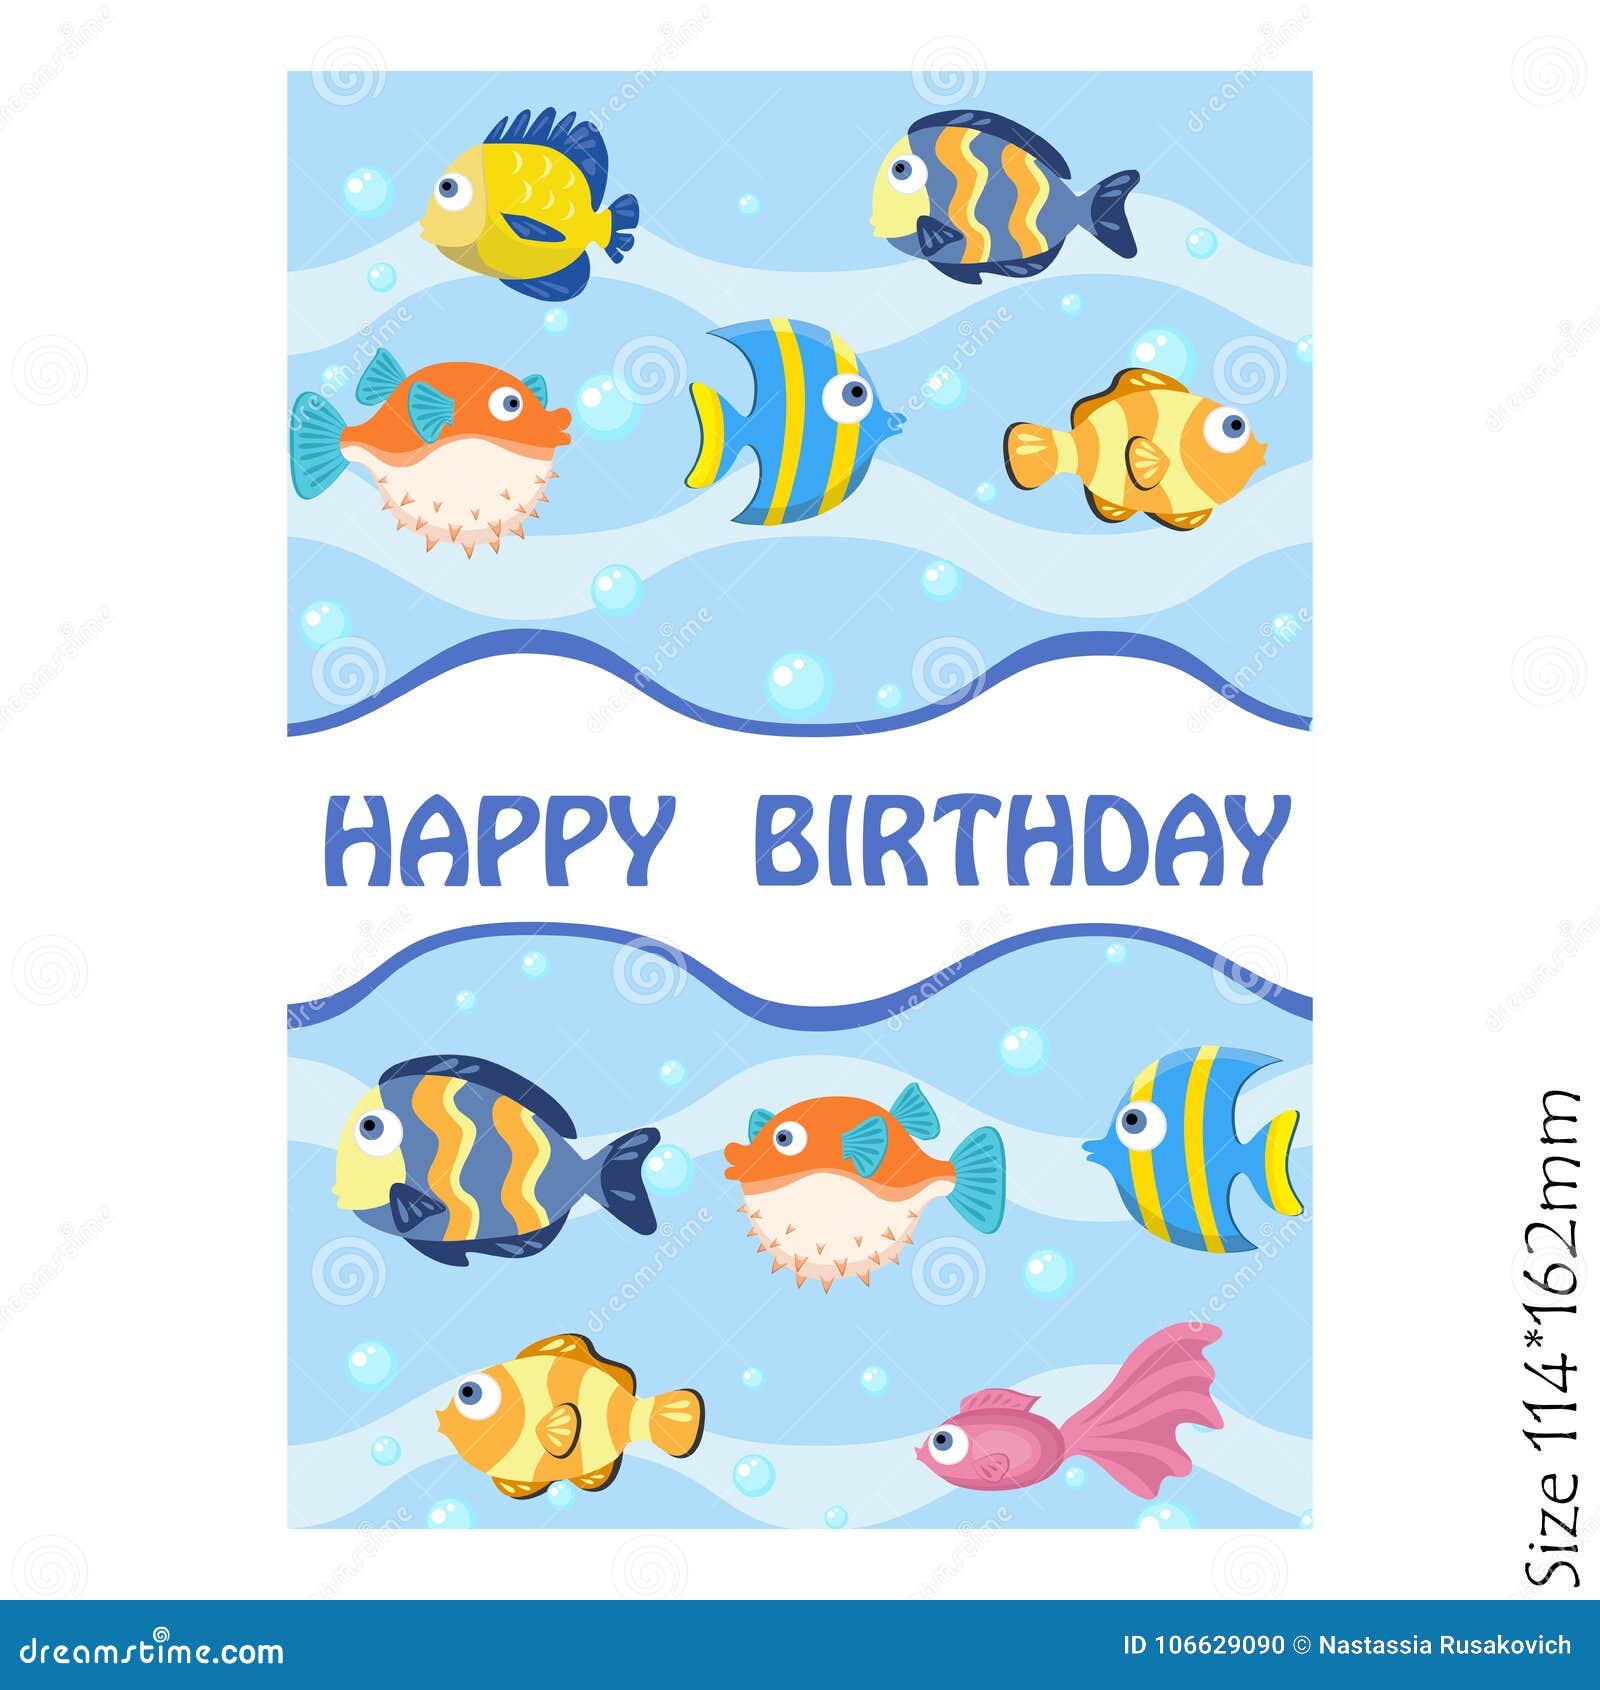 Greeting Card Happy Birthday With Colorful Fish Stock Vector - Illustration of kids, colorful ...